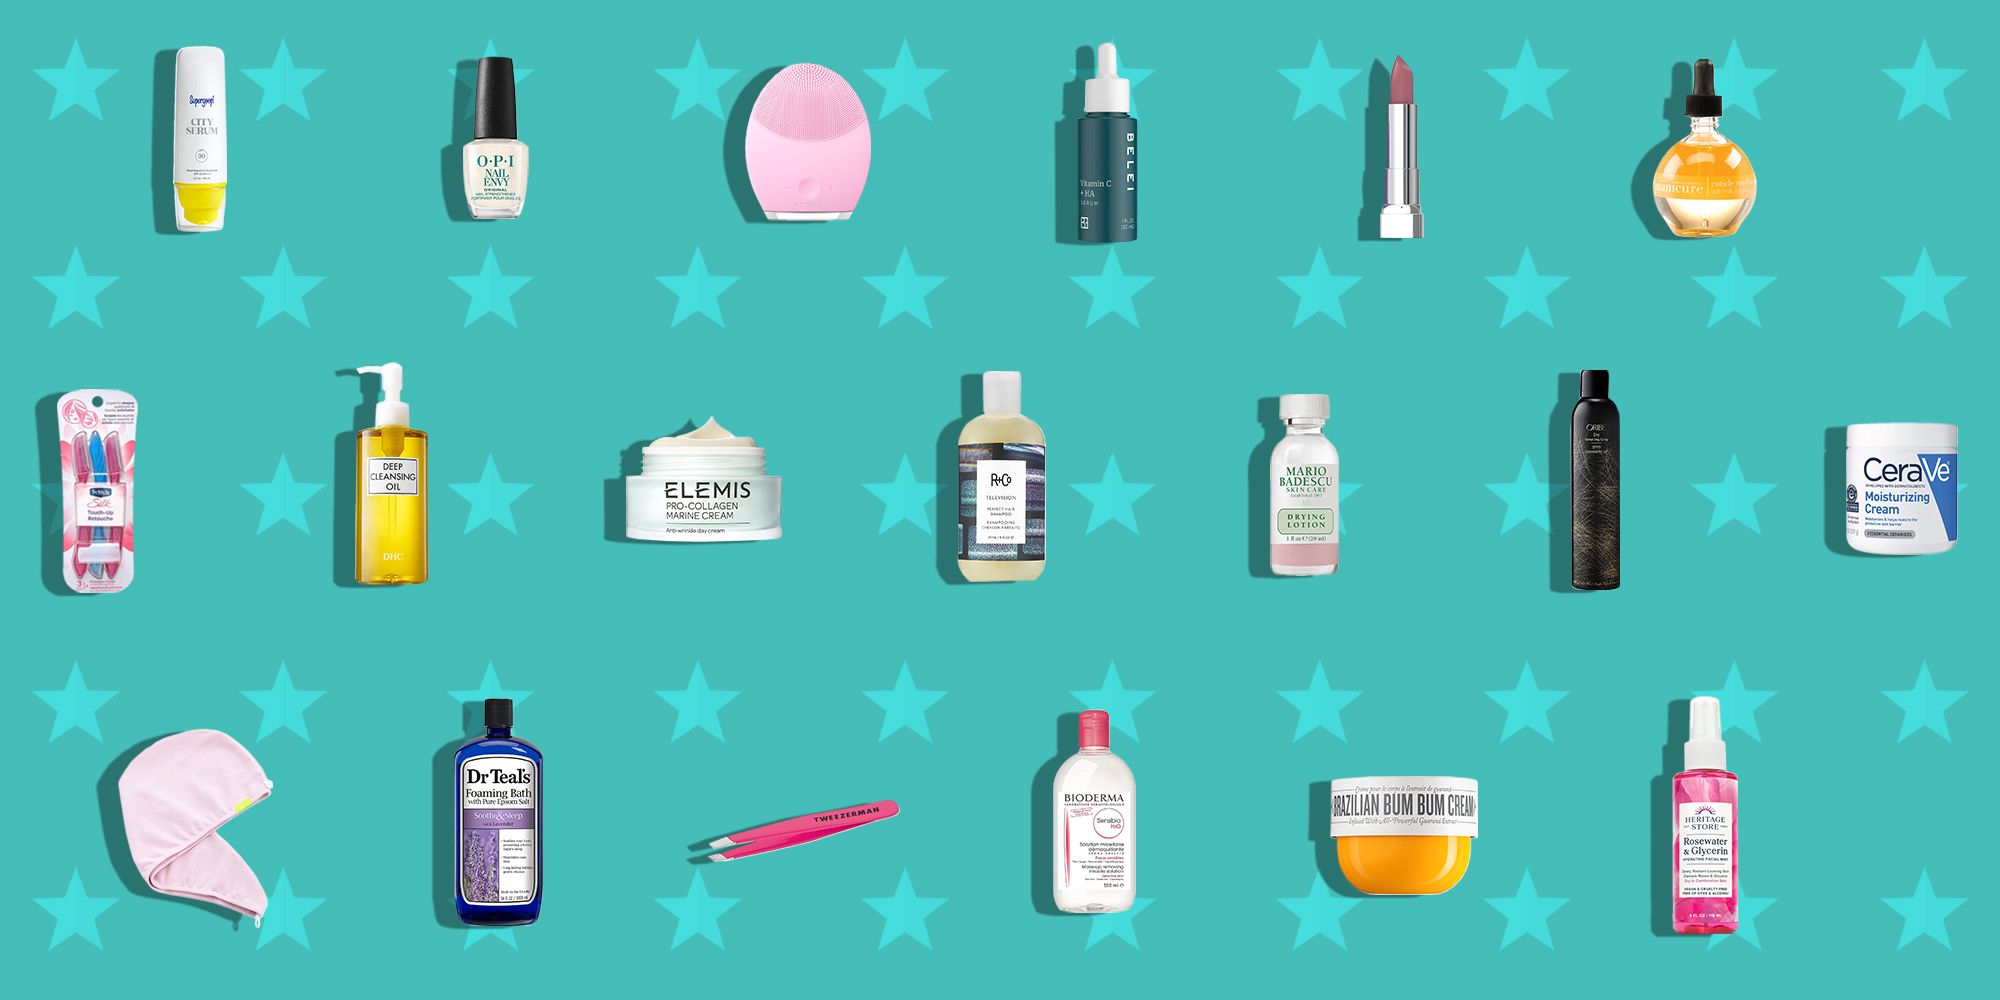 50 Best Beauty Products on Amazon 2021 - Makeup & Hair Products on Amazon